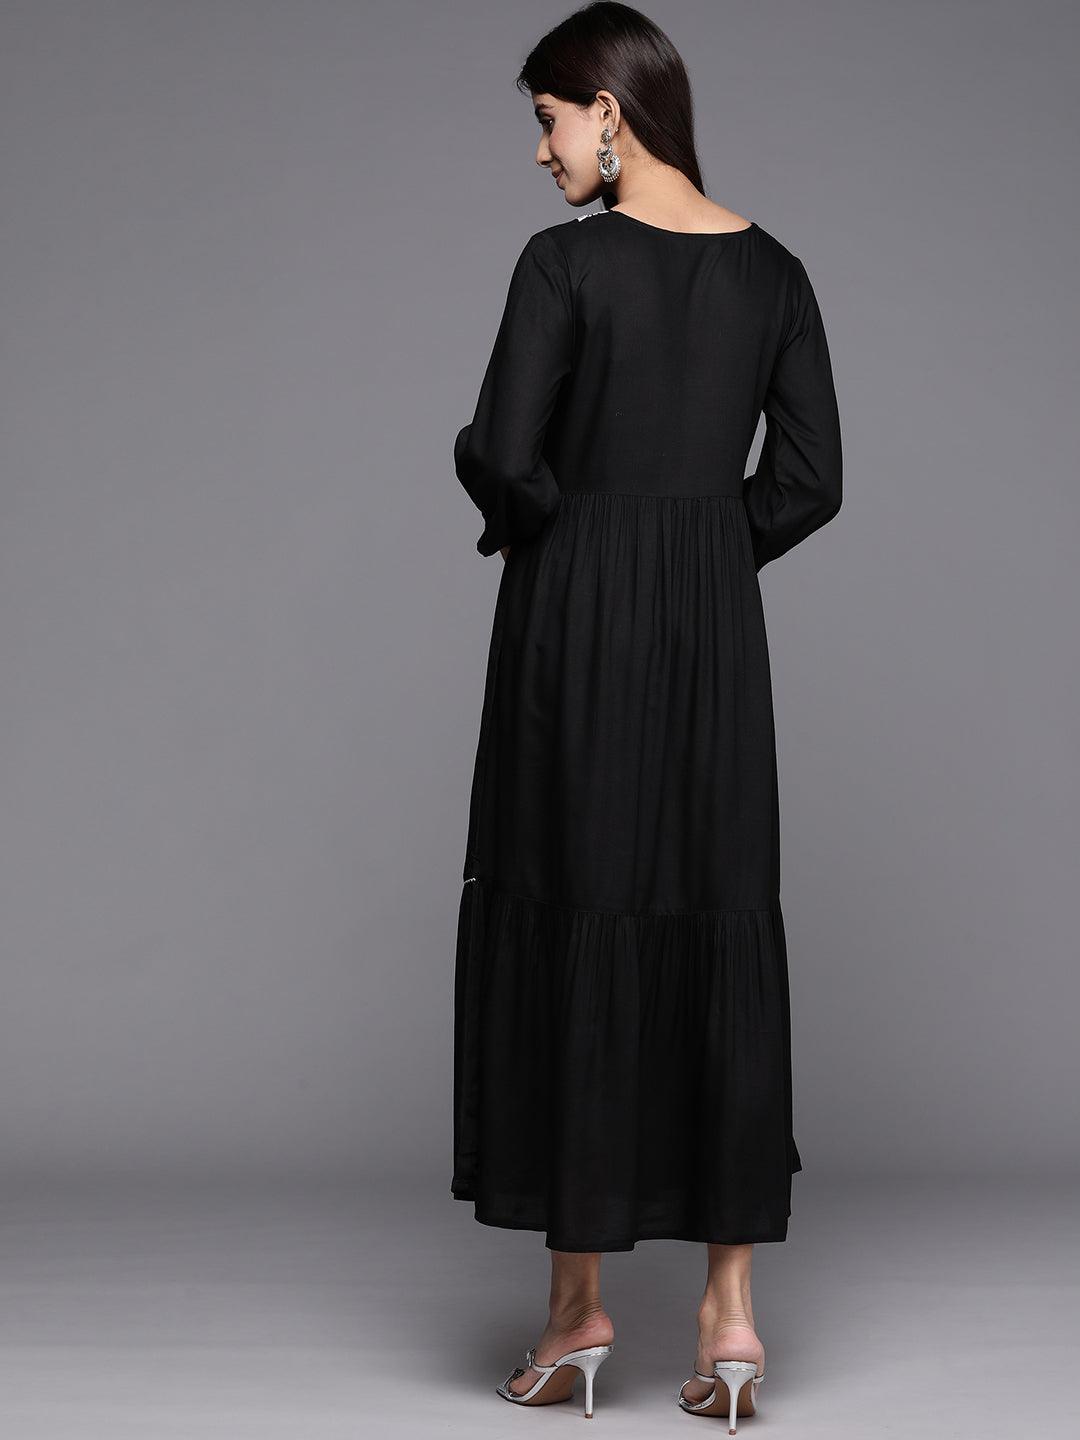 Black Embroidered Rayon Maxi Dress